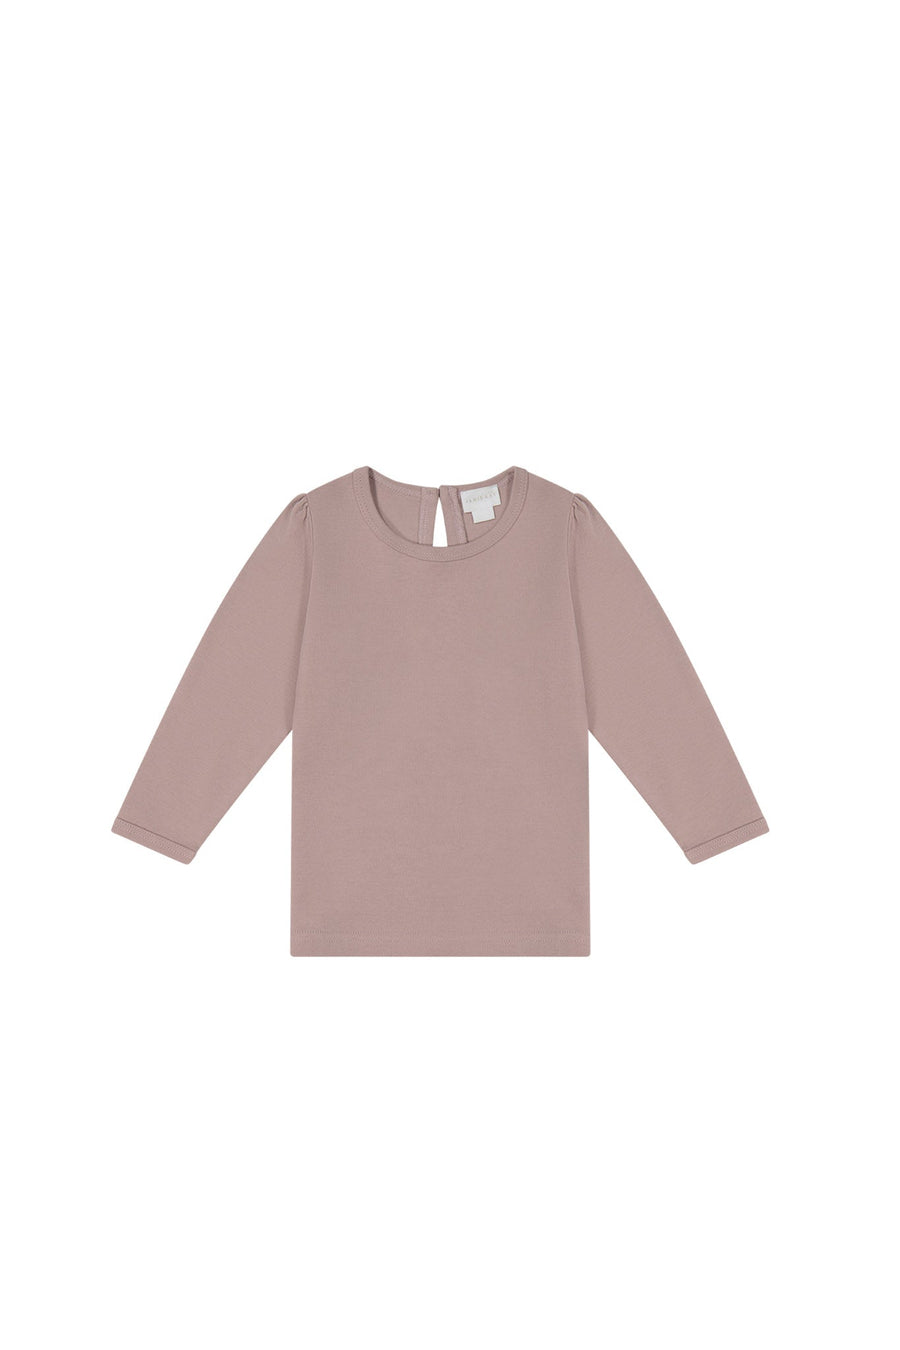 Pima Cotton Cindy Top - Softest Mauve Childrens Top from Jamie Kay NZ